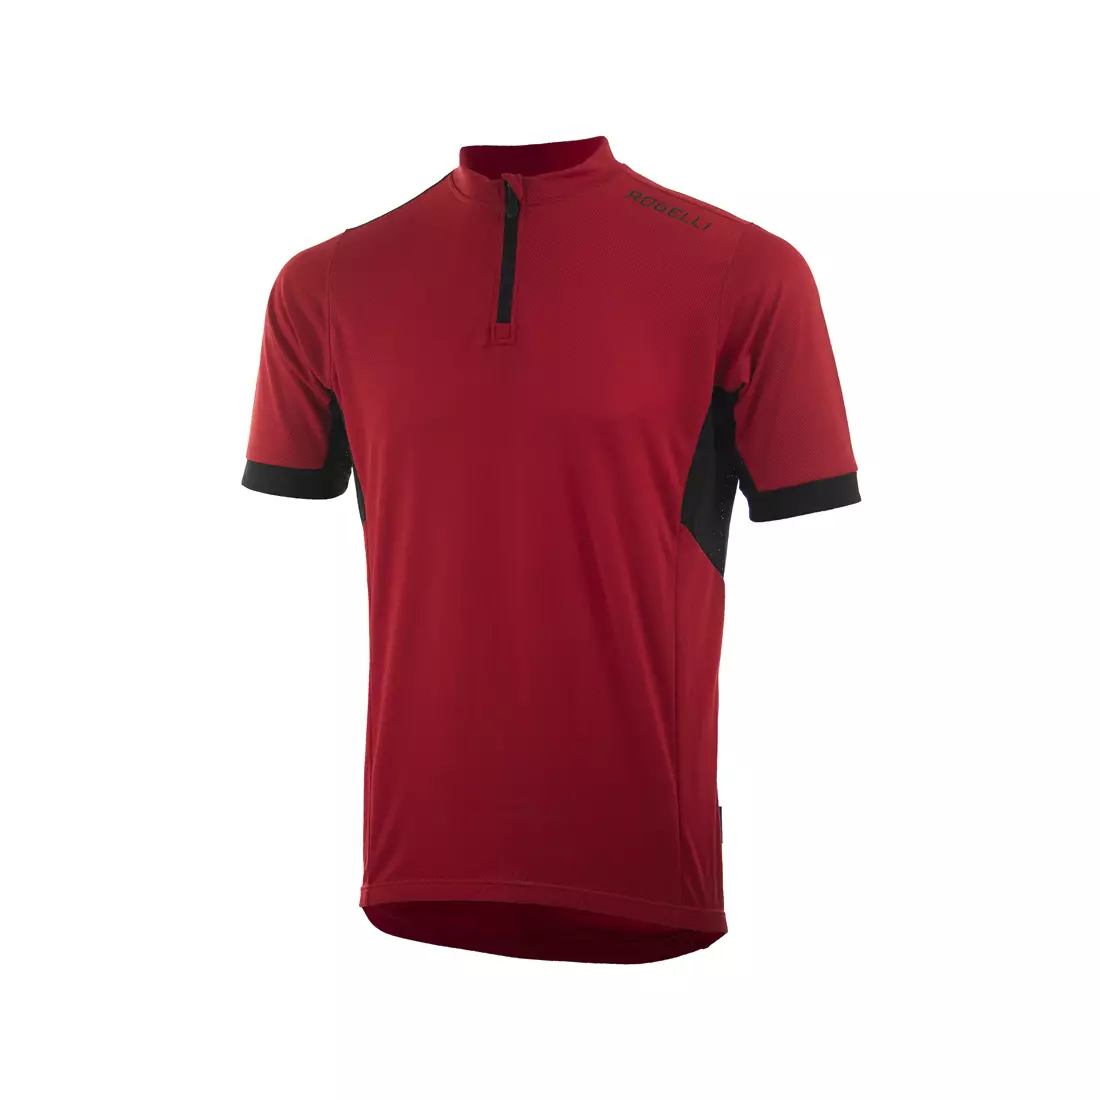 ROGELLI PERUGIA 2.0 men's cycling jersey red